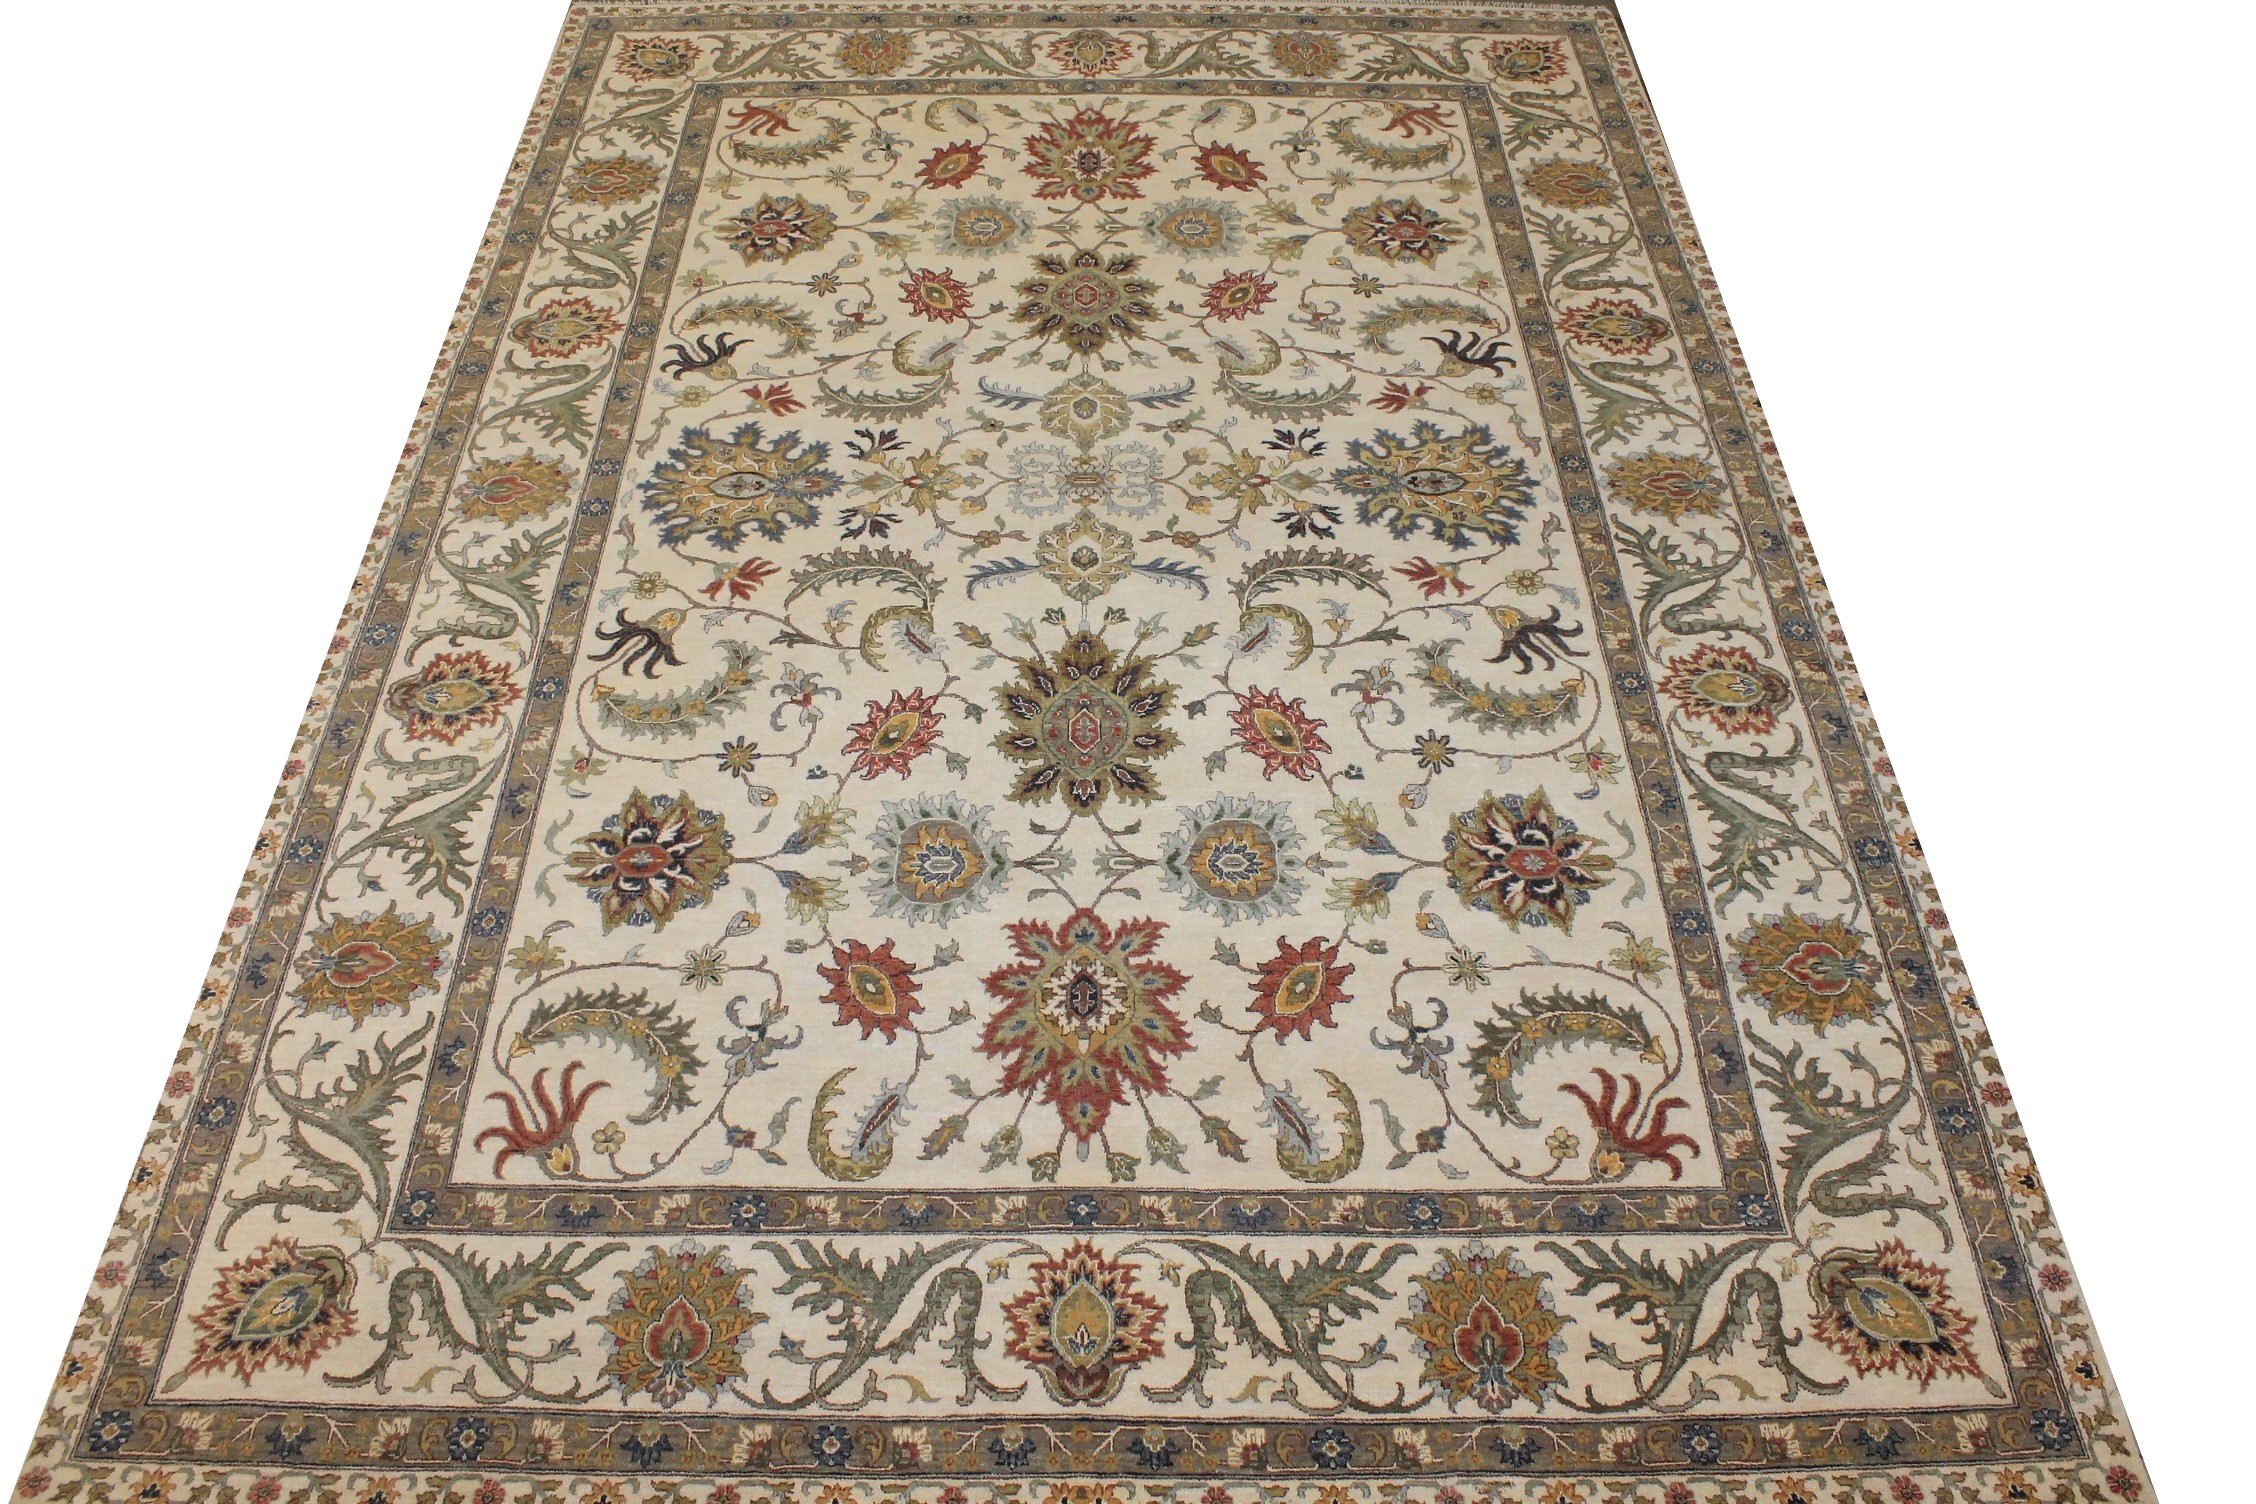 10x14 Traditional Hand Knotted Wool Area Rug - MR028189